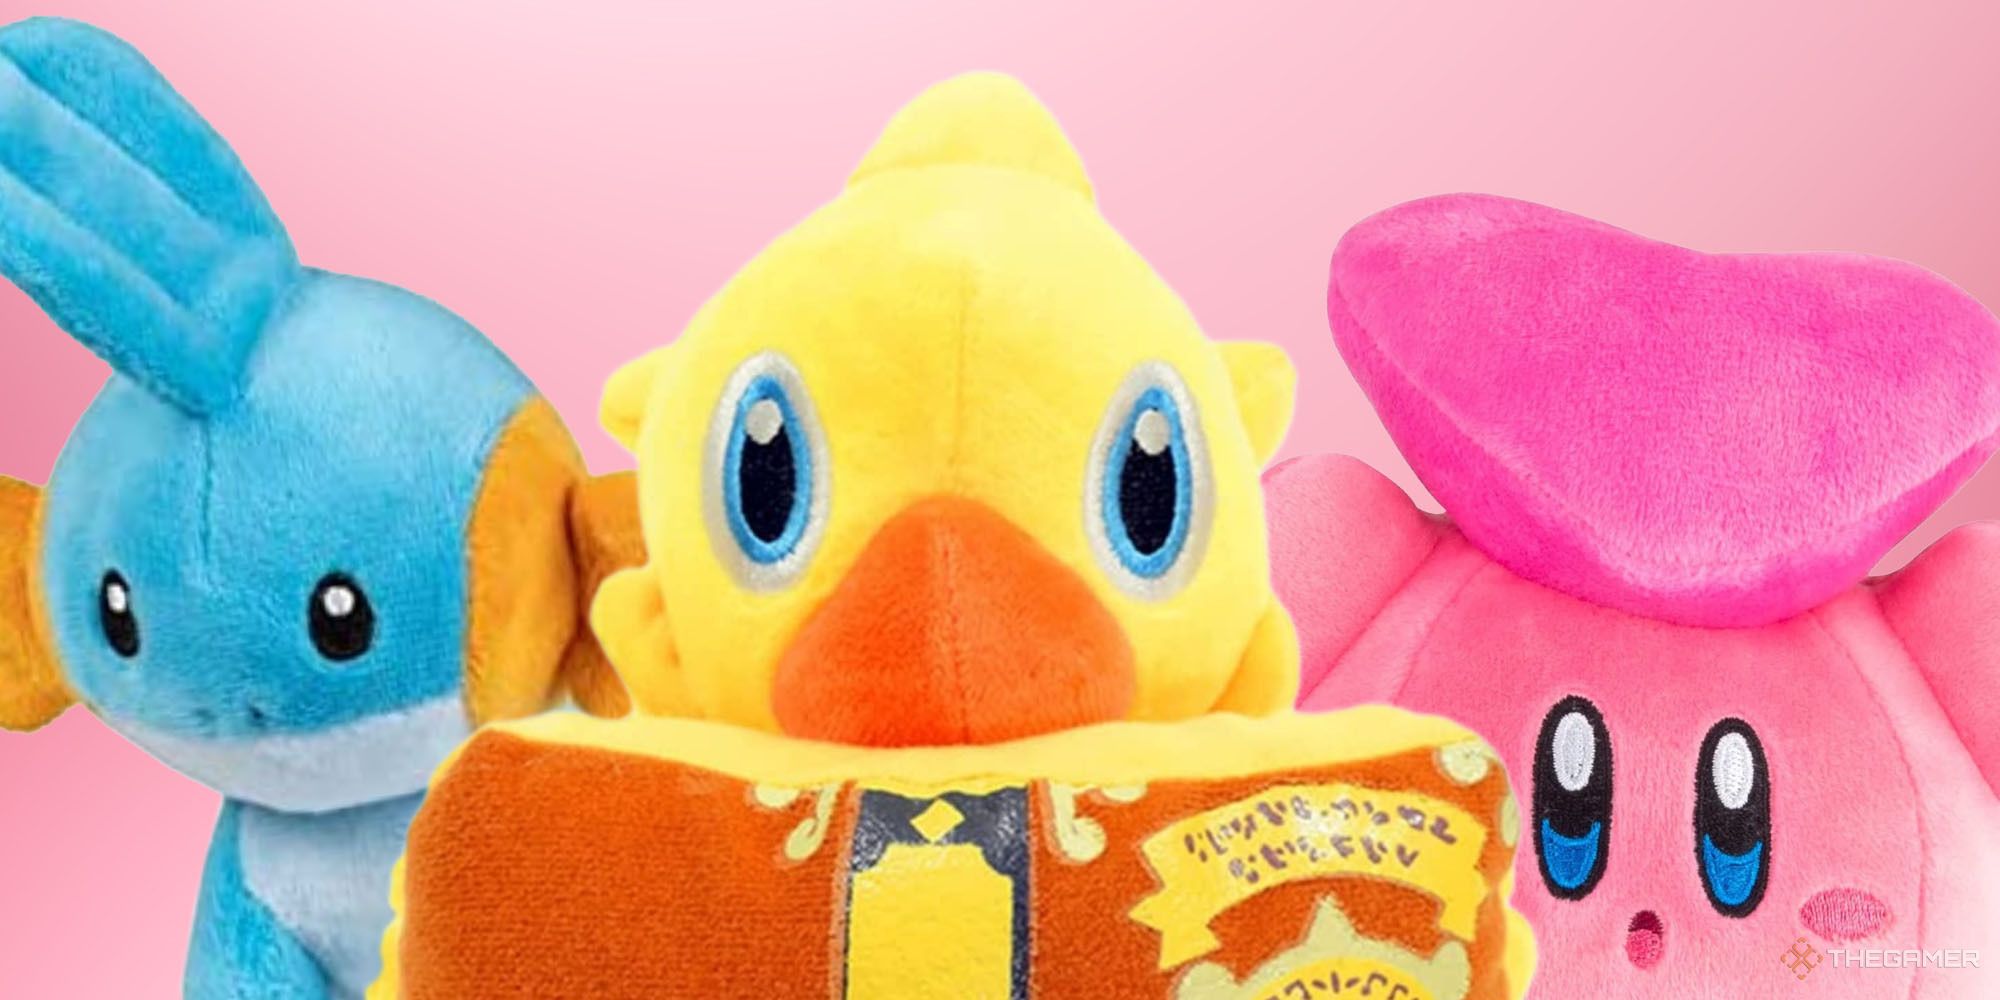 Mudkip, Chocobo, and Kirby plushes on a pink background